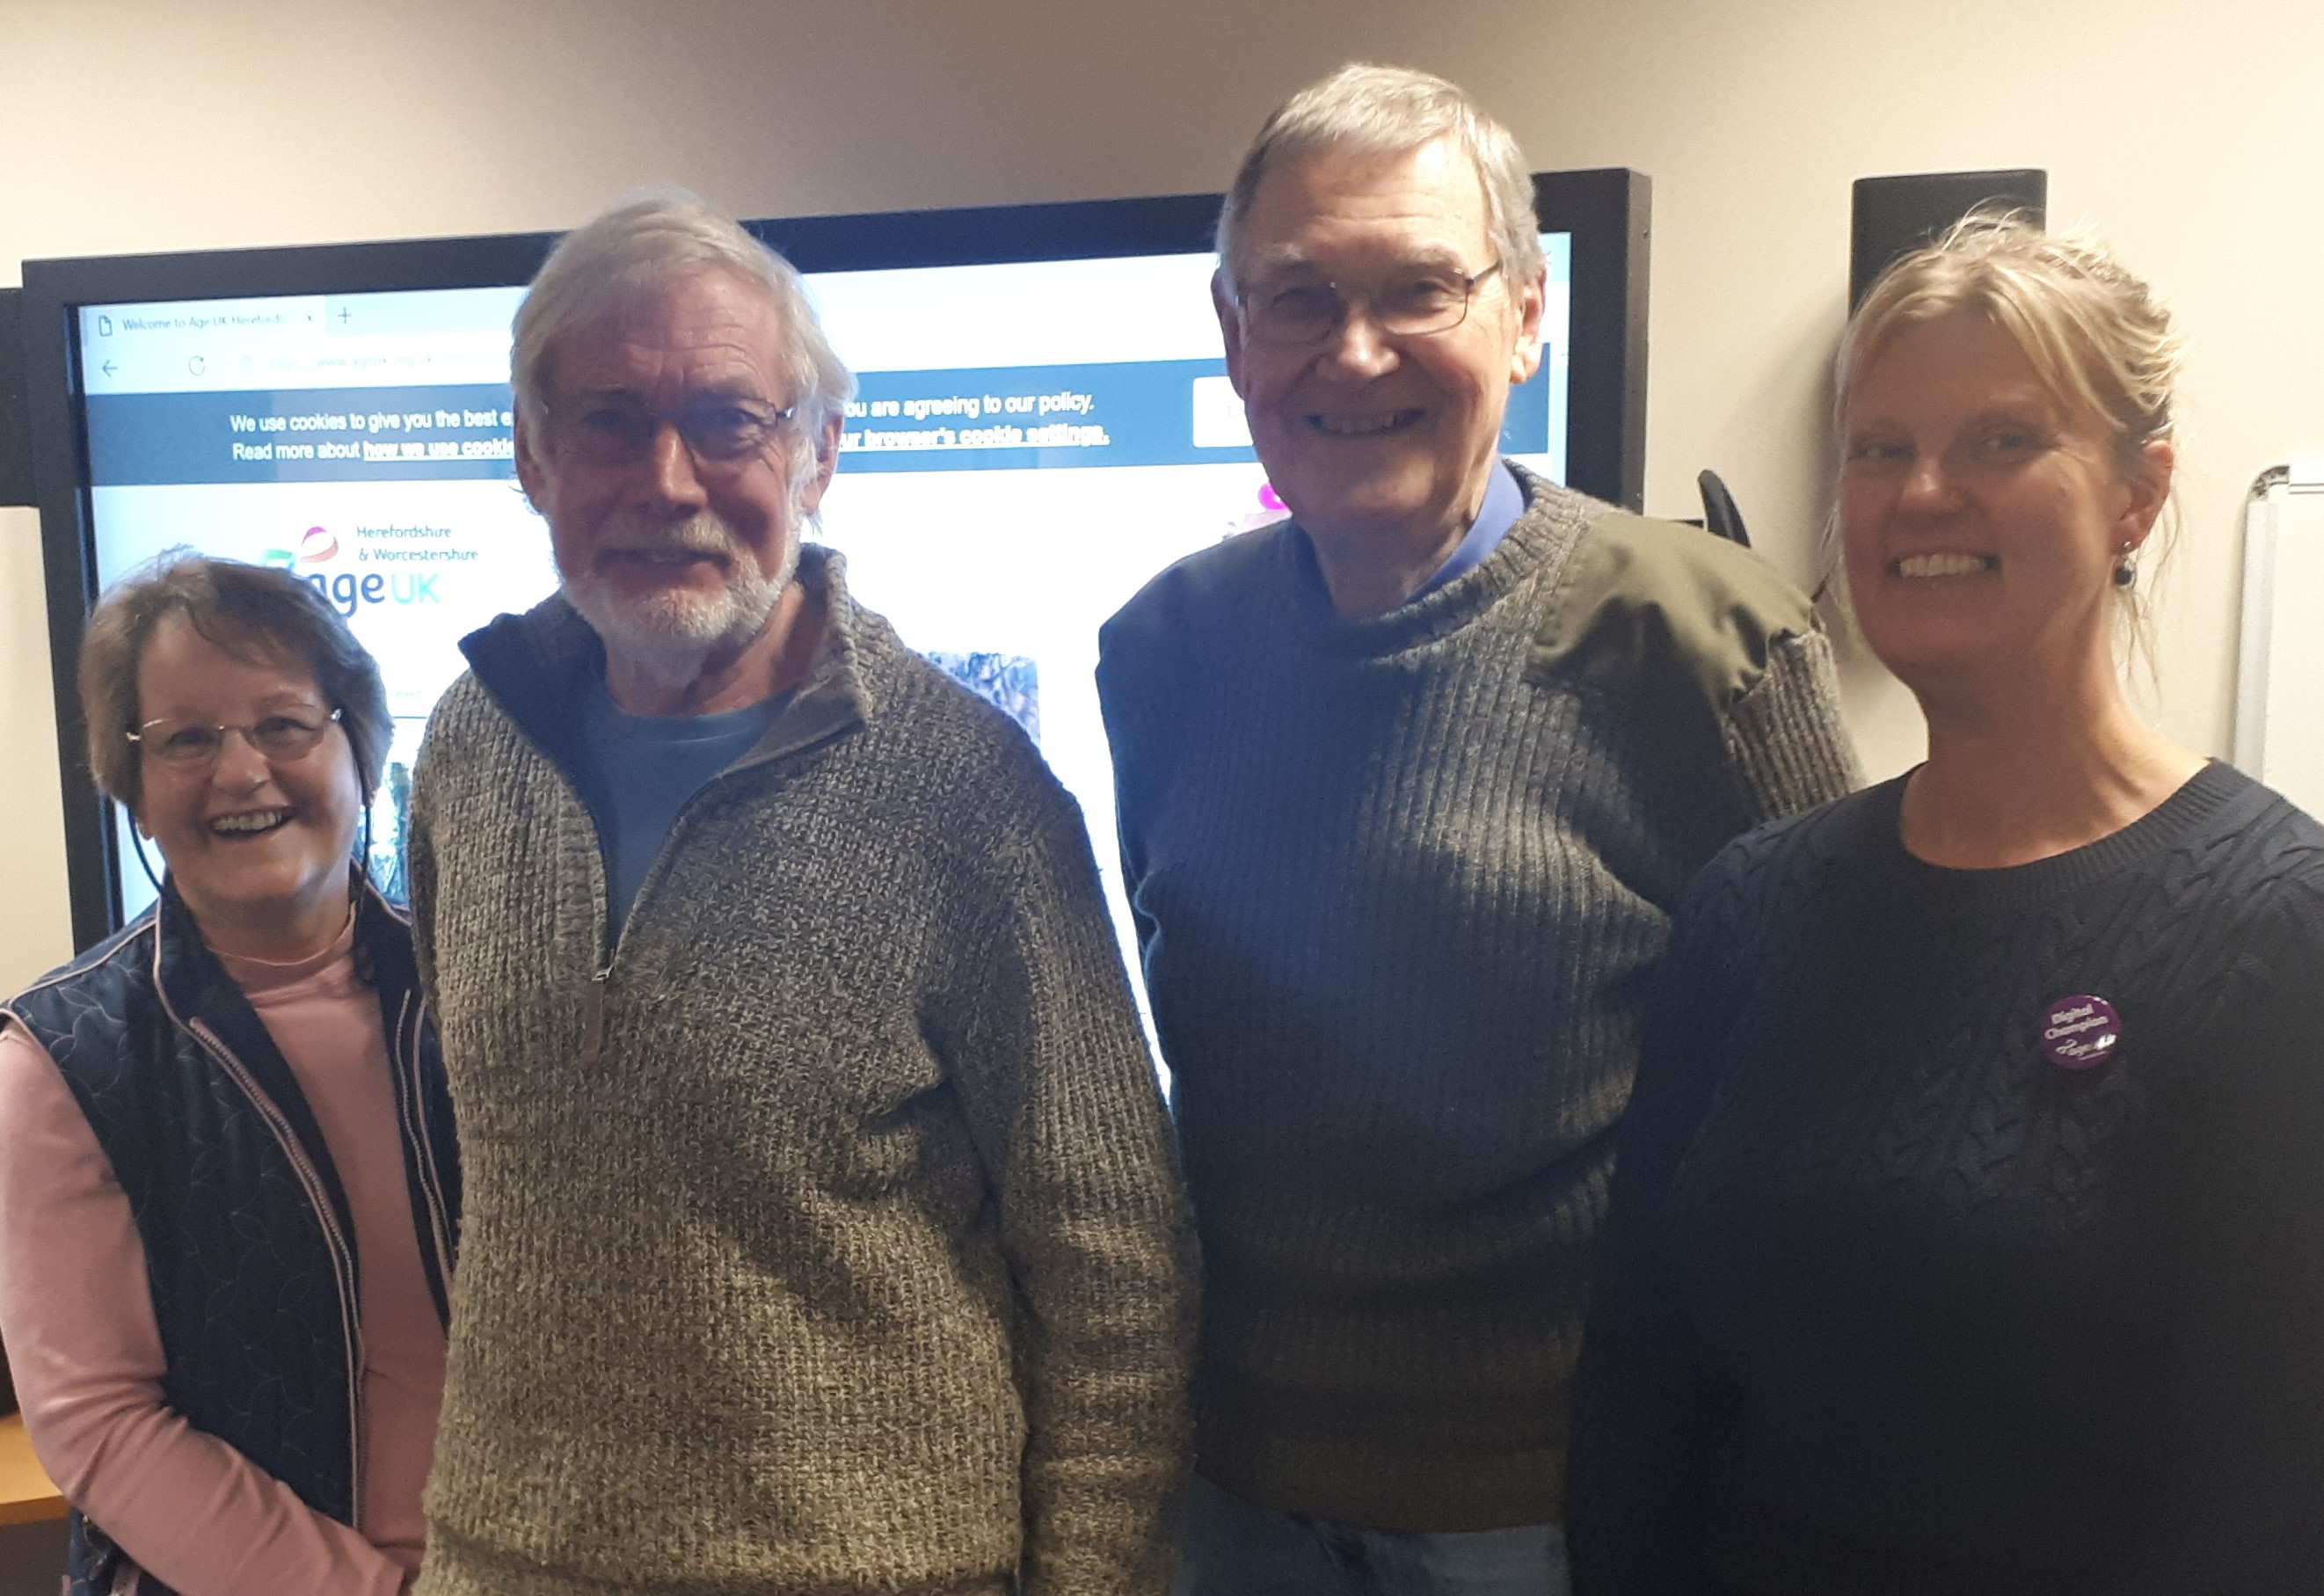 Here is a photo of me at the Ross Cancer support group on TuesLeft to right is Jean Brown, Paul Baker, Sam Philips of Ross cancer care support  and Alison Fletcher of Age UK herefordshire & Worcestershire